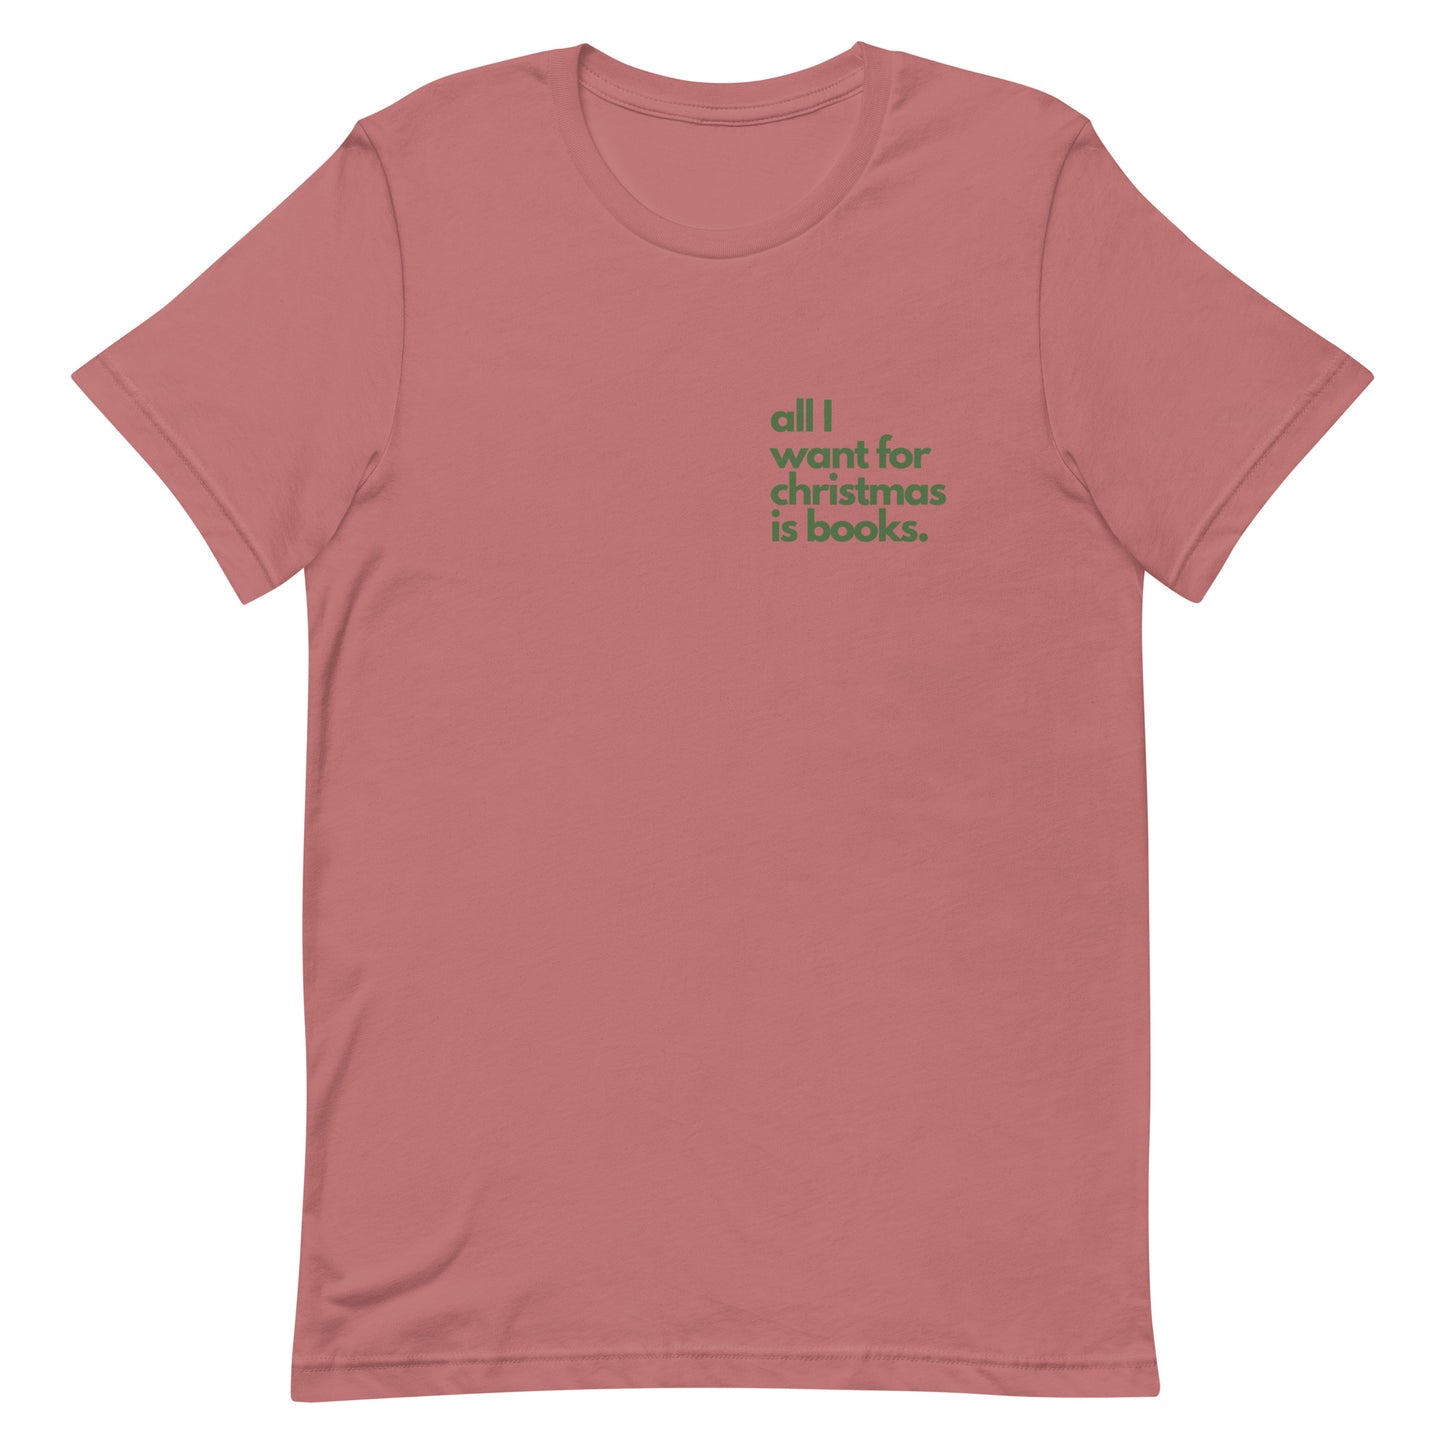 all i want for christmas is books/book tree t-shirt